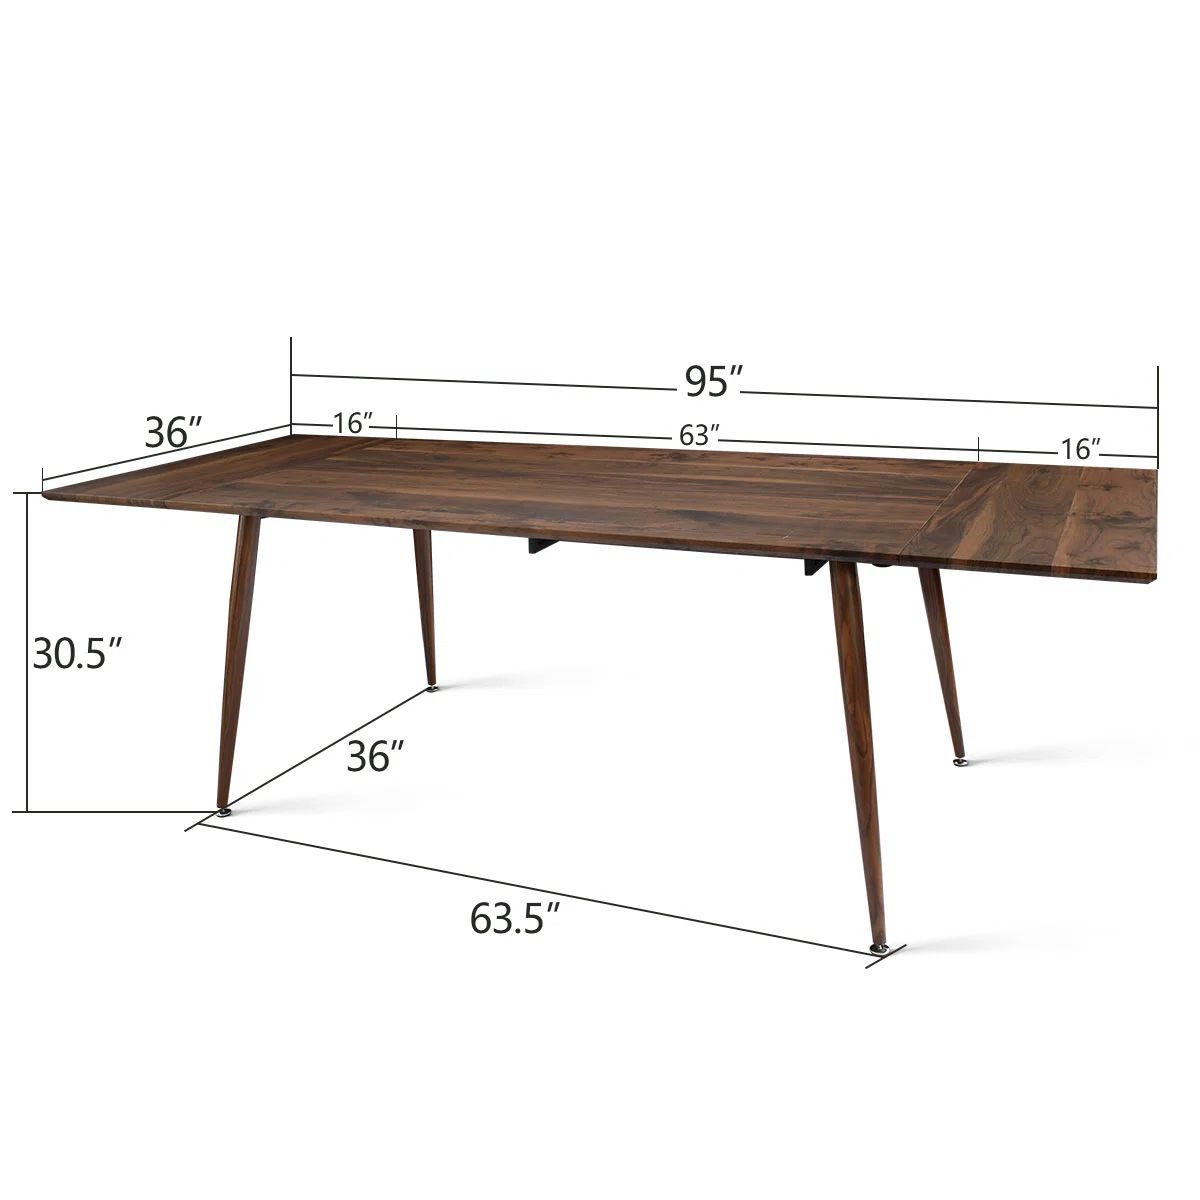 Cloria 95" L Extendable Dining Table | Wayfair North America